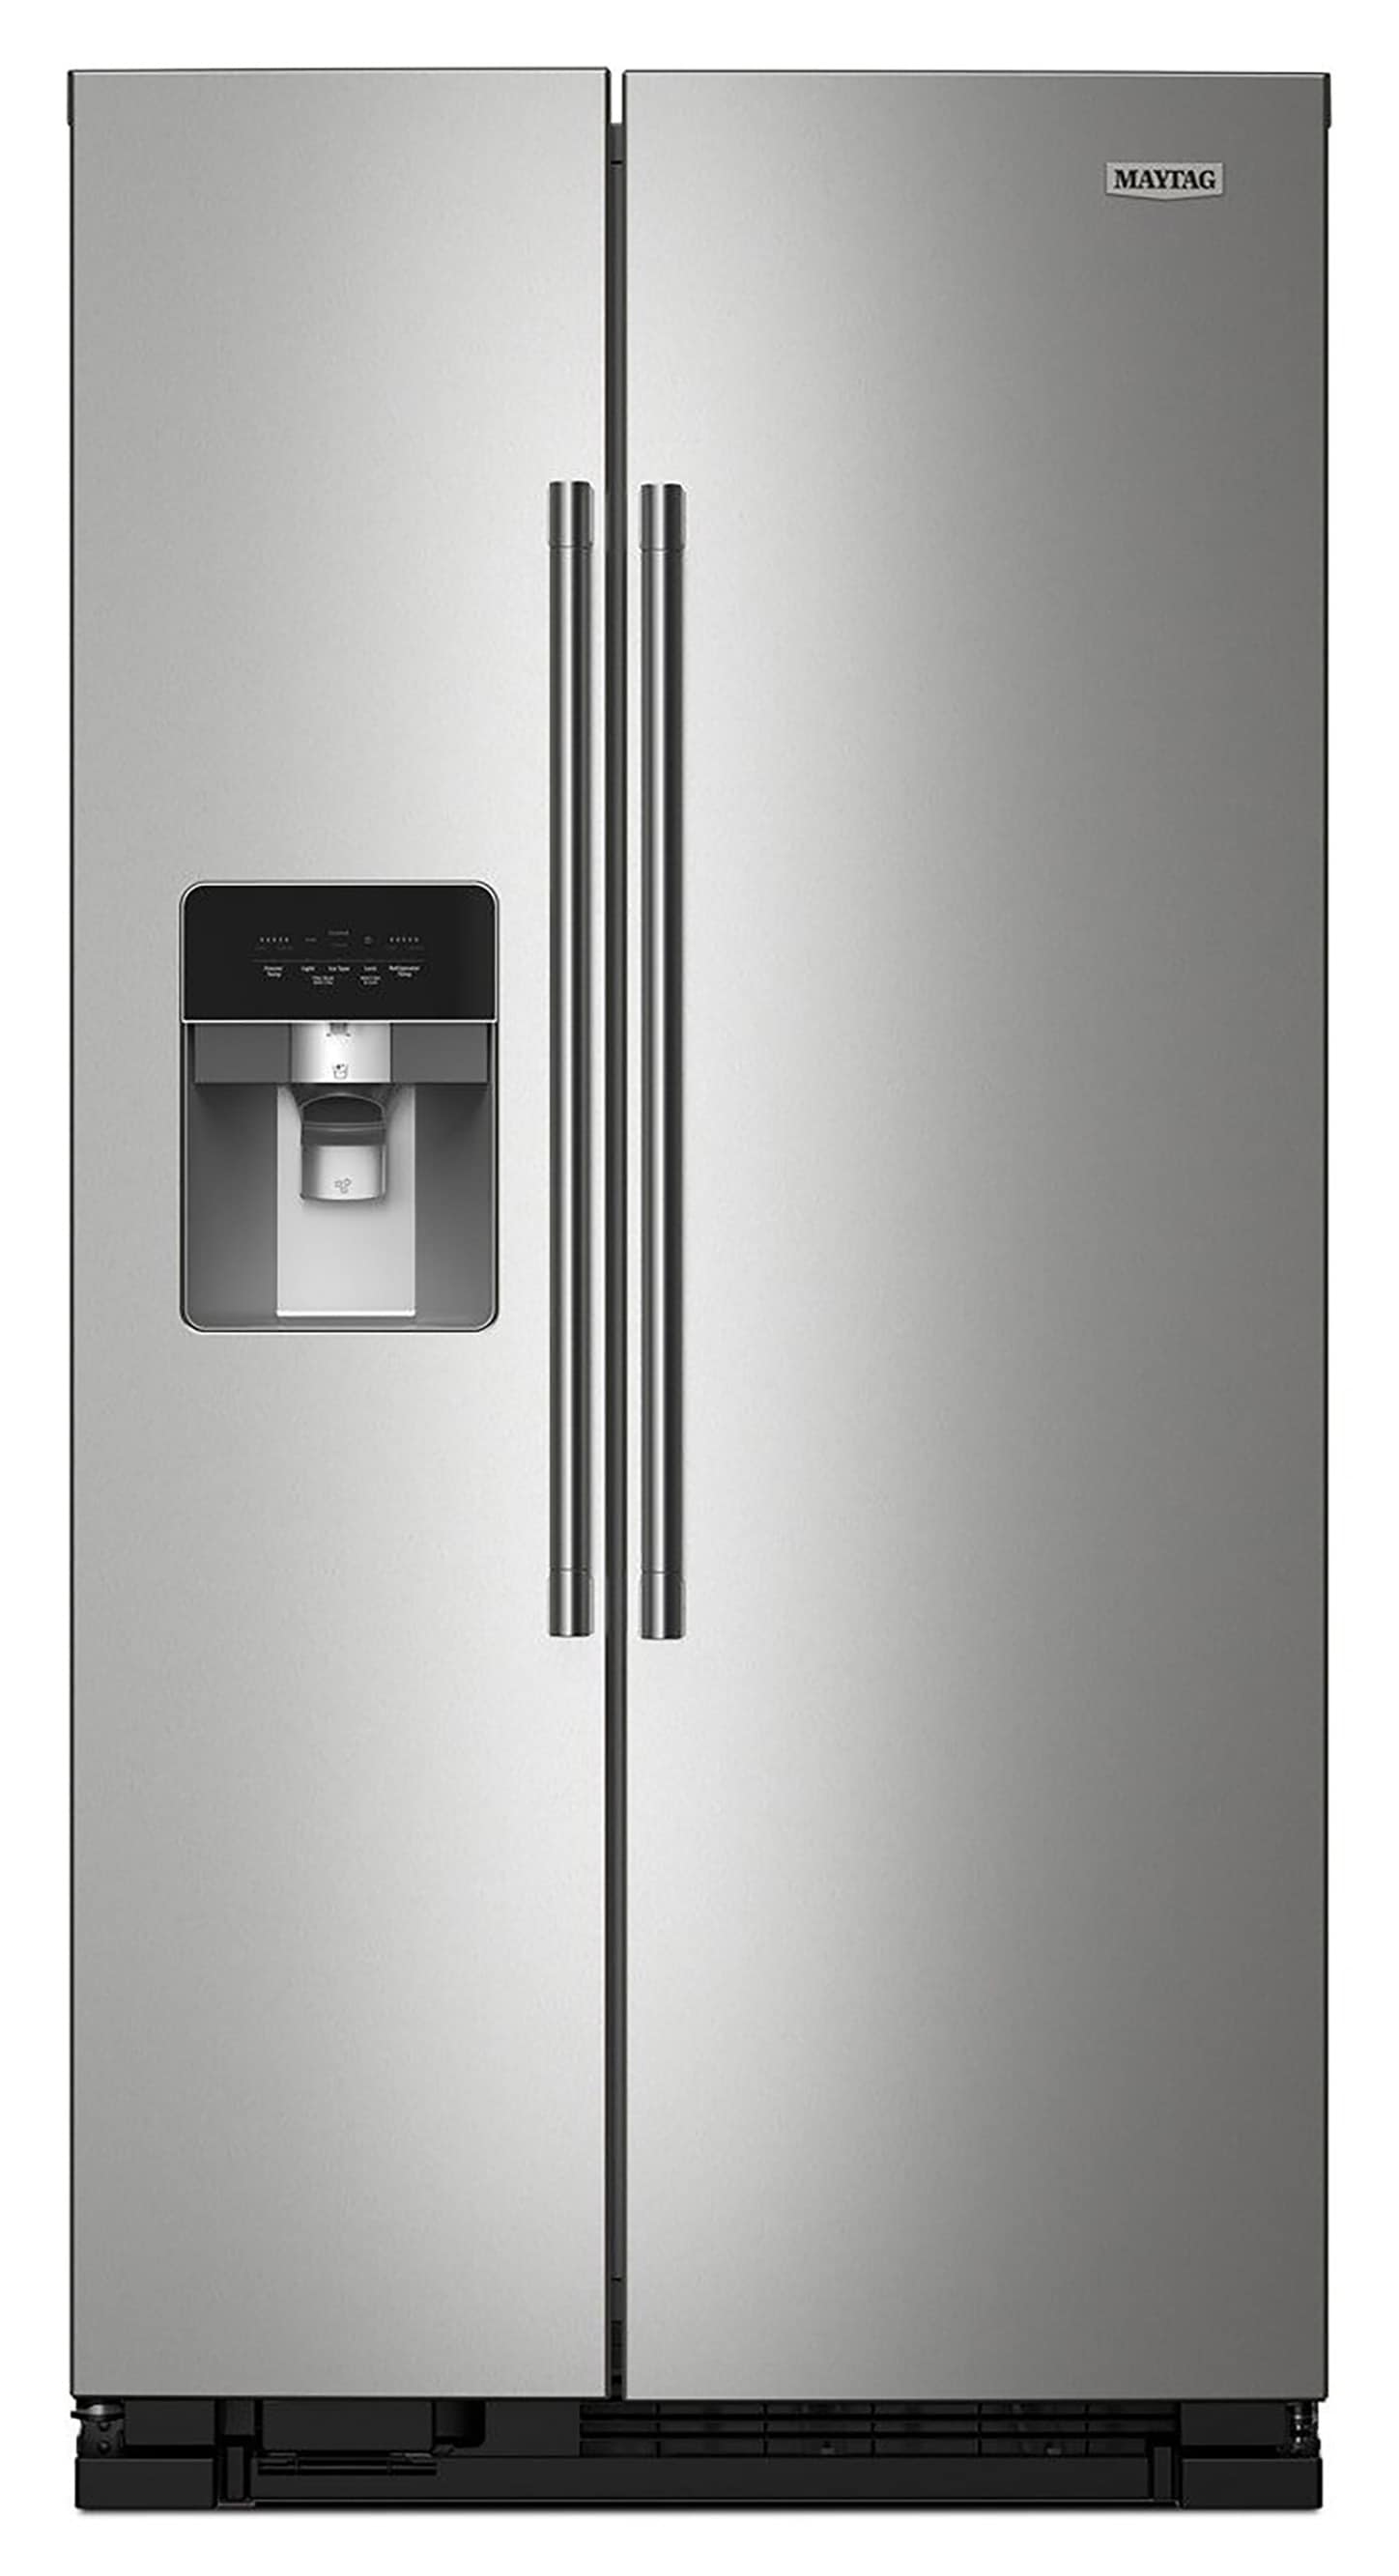 Maytag 24.5-cu ft Side-by-Side Refrigerator (White) in the Side-by-Side ...